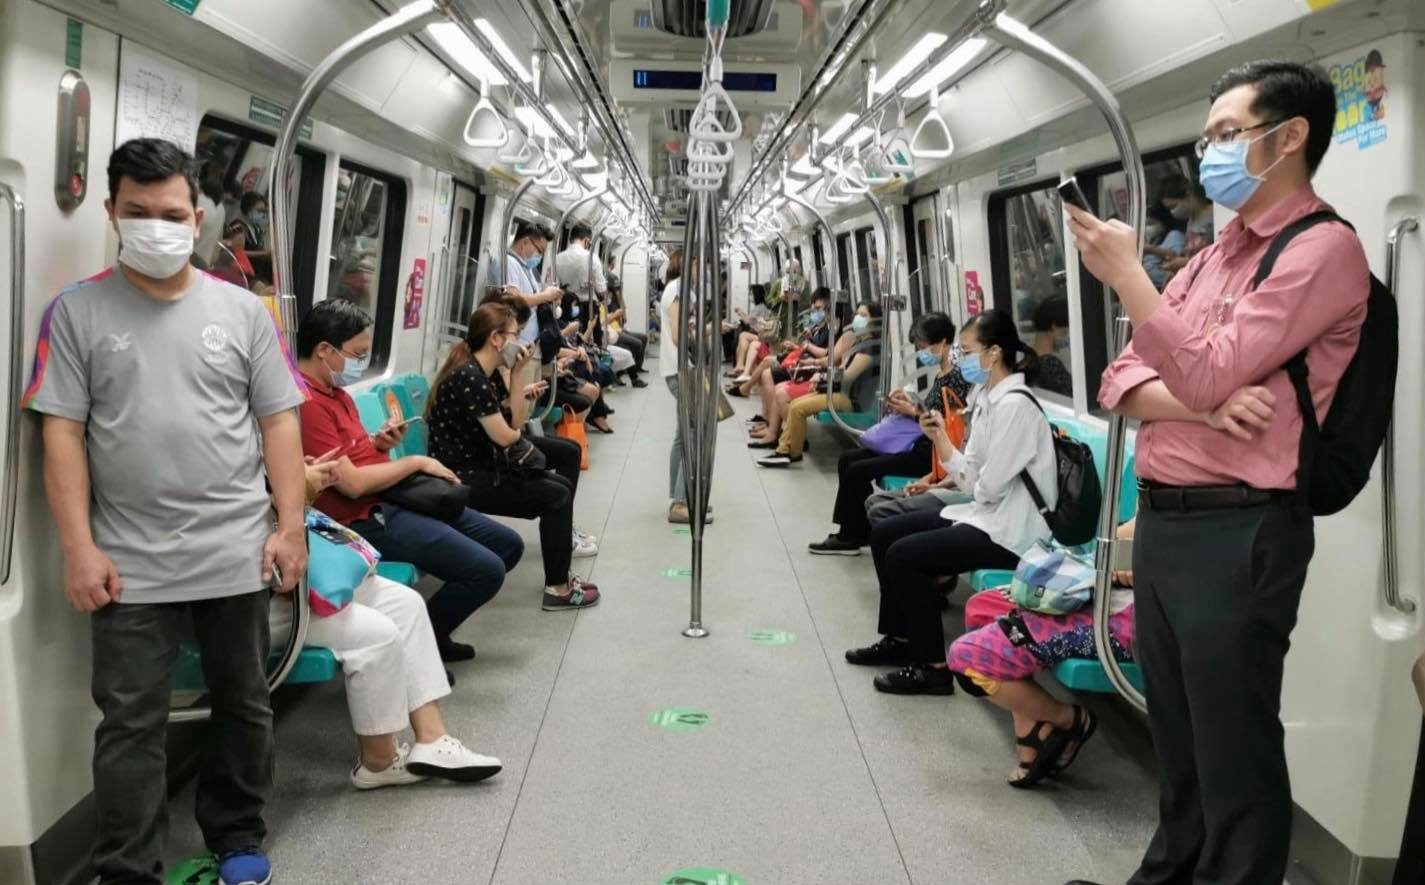 Commuters spread out on a train in Singapore in a photo posted April 20, 2020. Photo: Land Transport Authority/Facebook